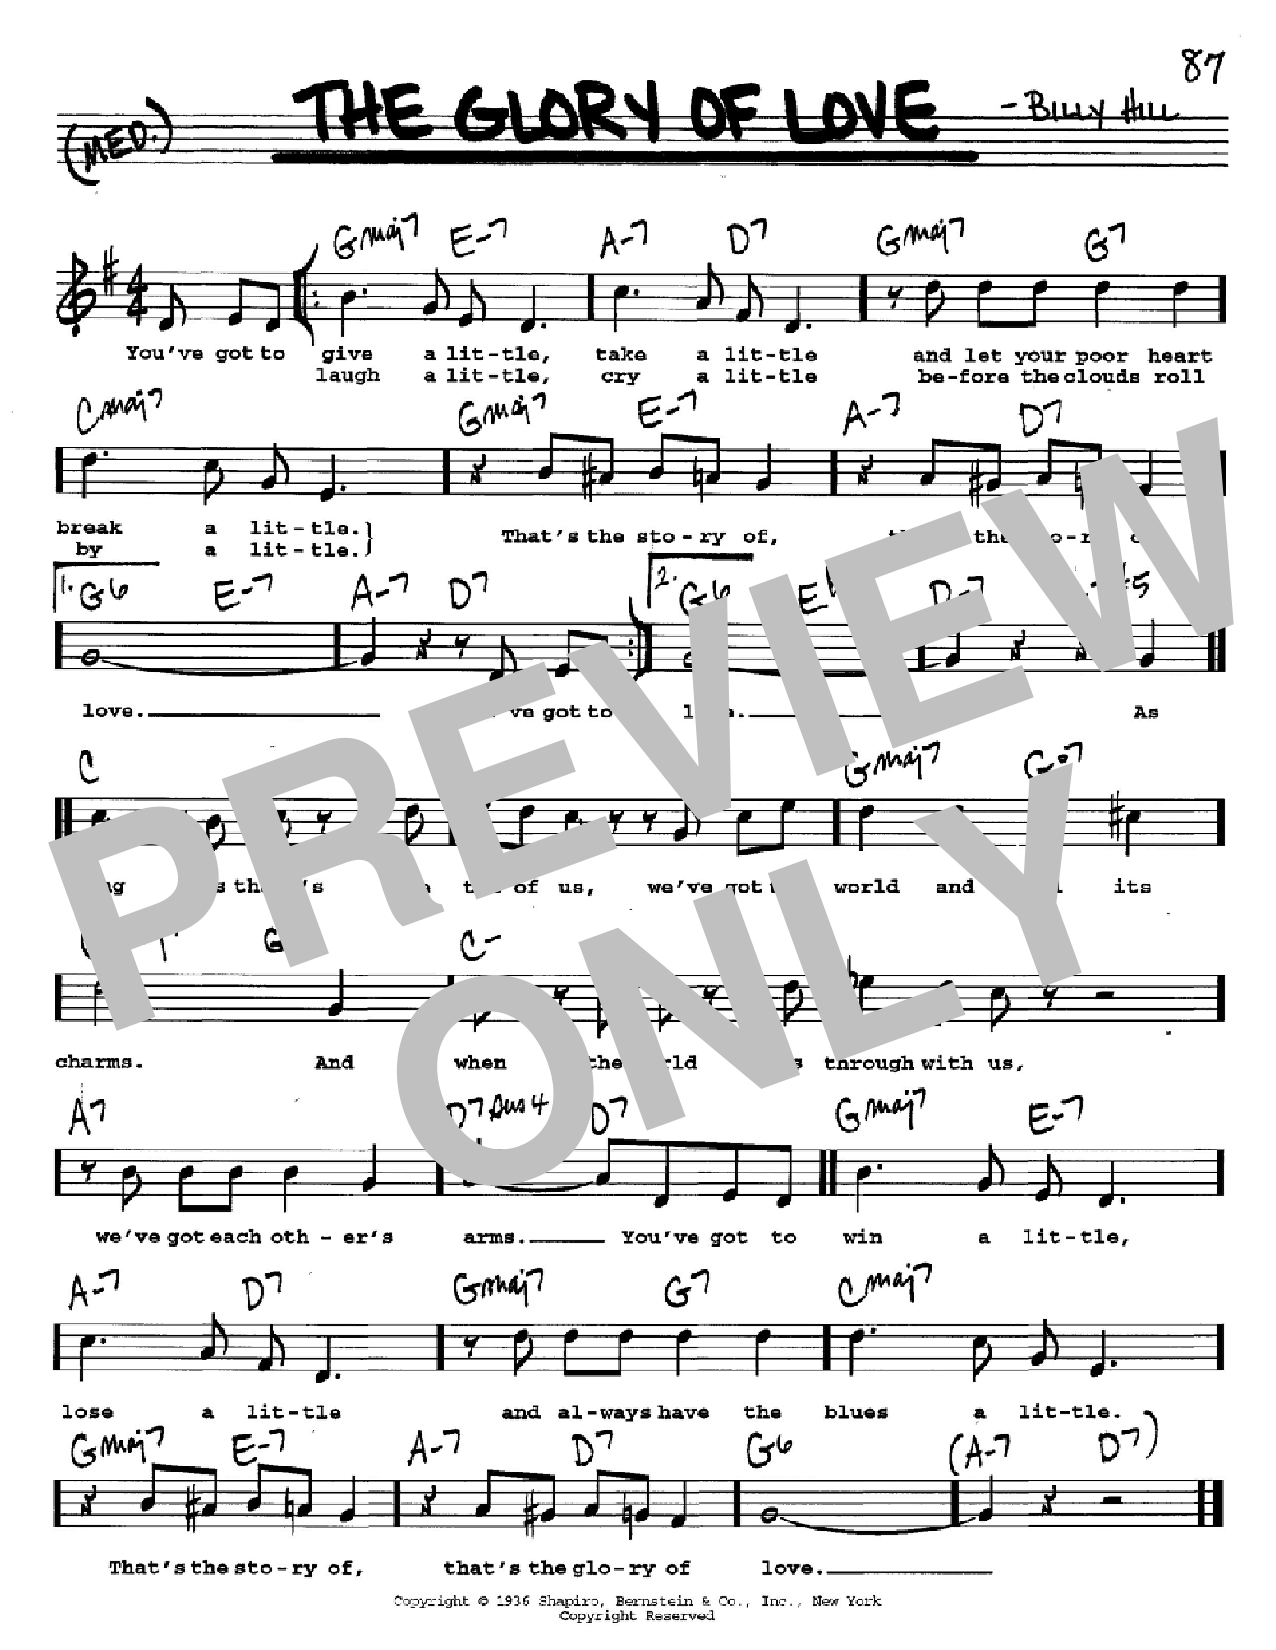 Download Count Basie The Glory Of Love Sheet Music